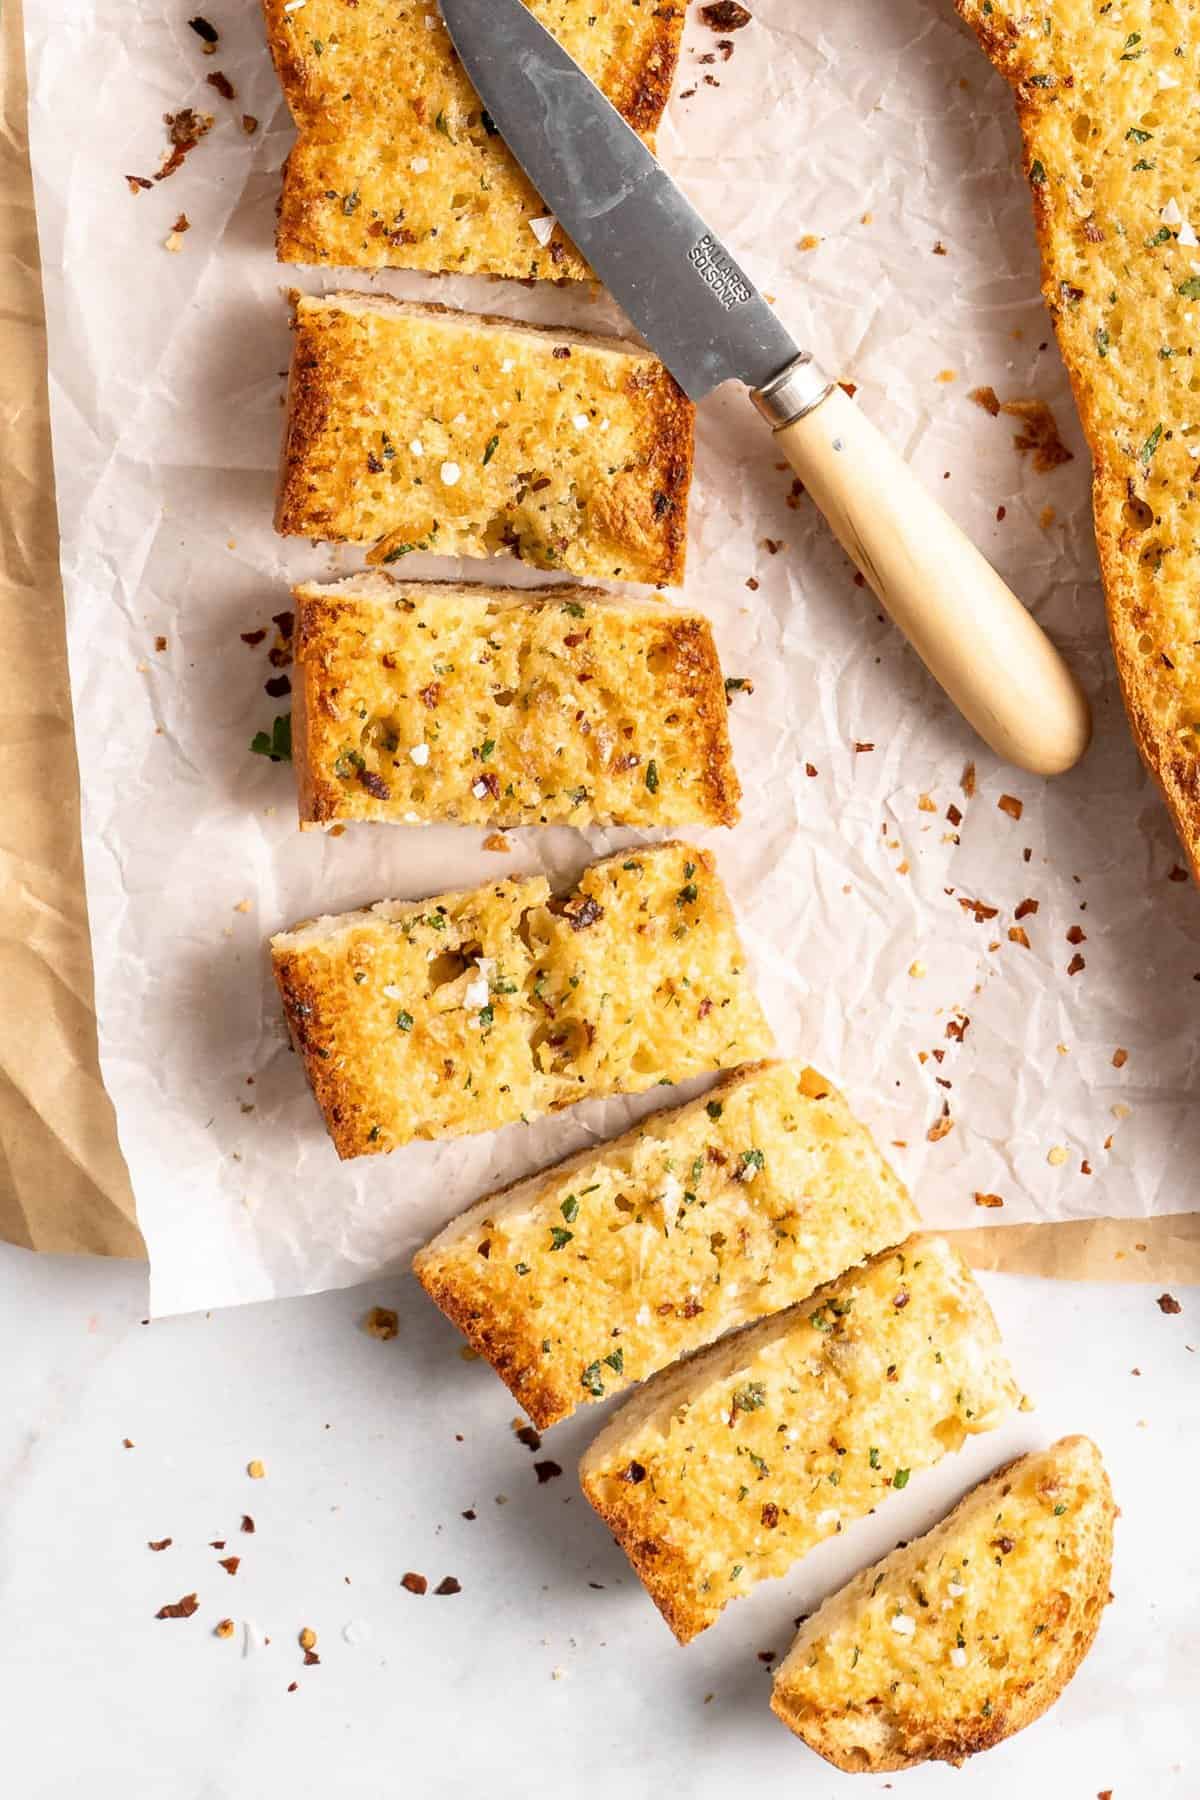 Garlic bread sliced into pieces with knife